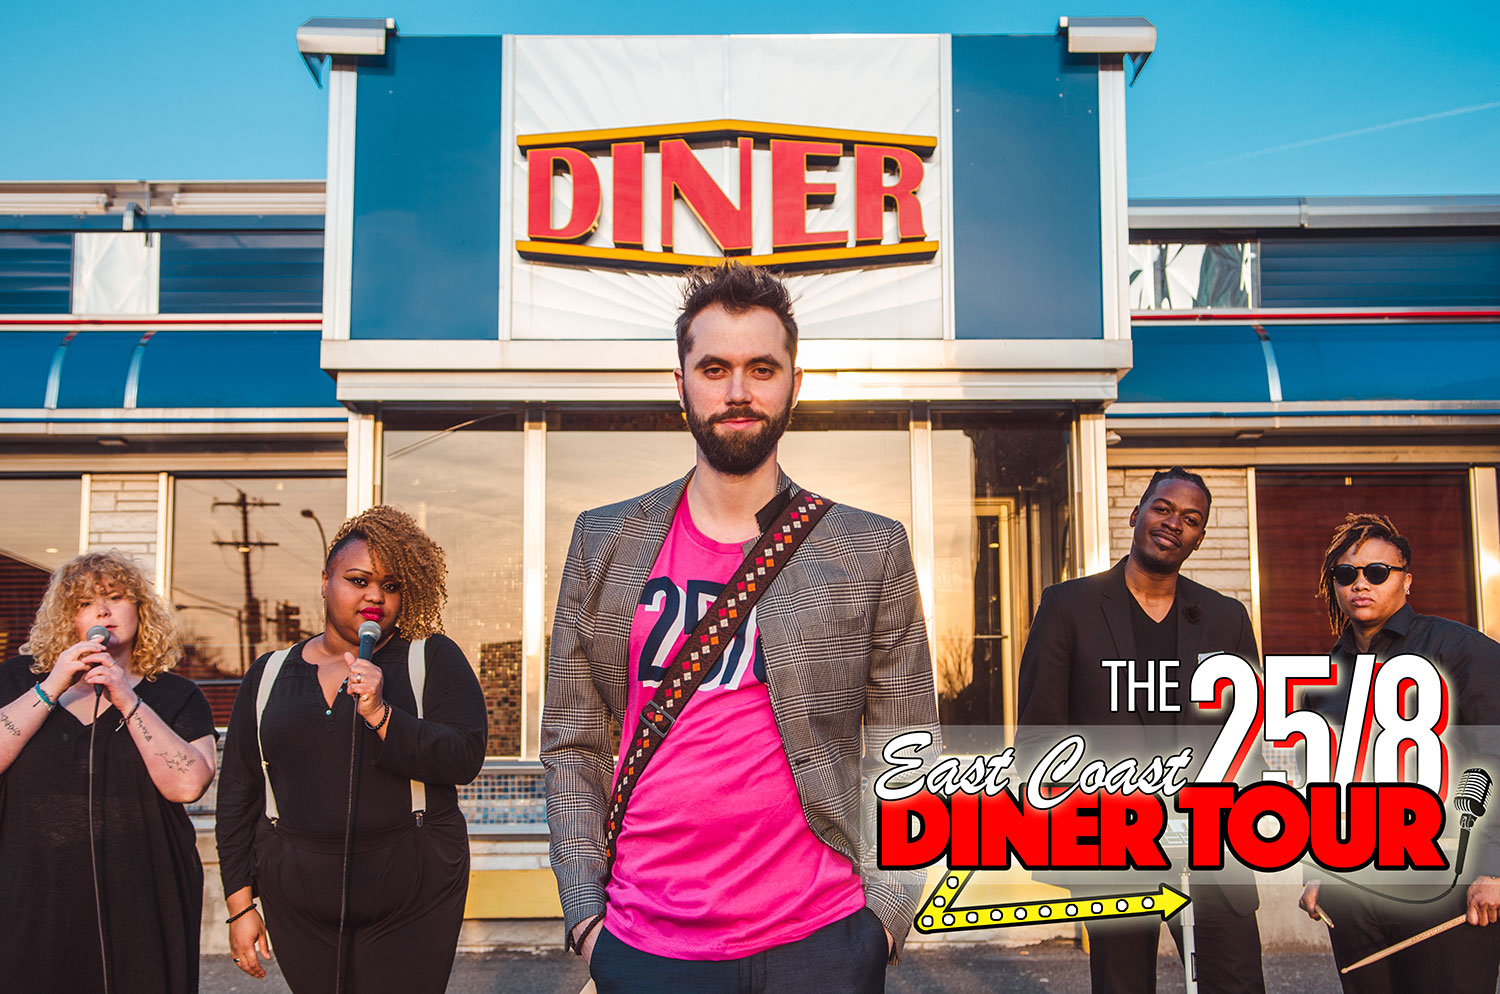 24/7, Why Not 25/8 with the East Coast Diner Tour